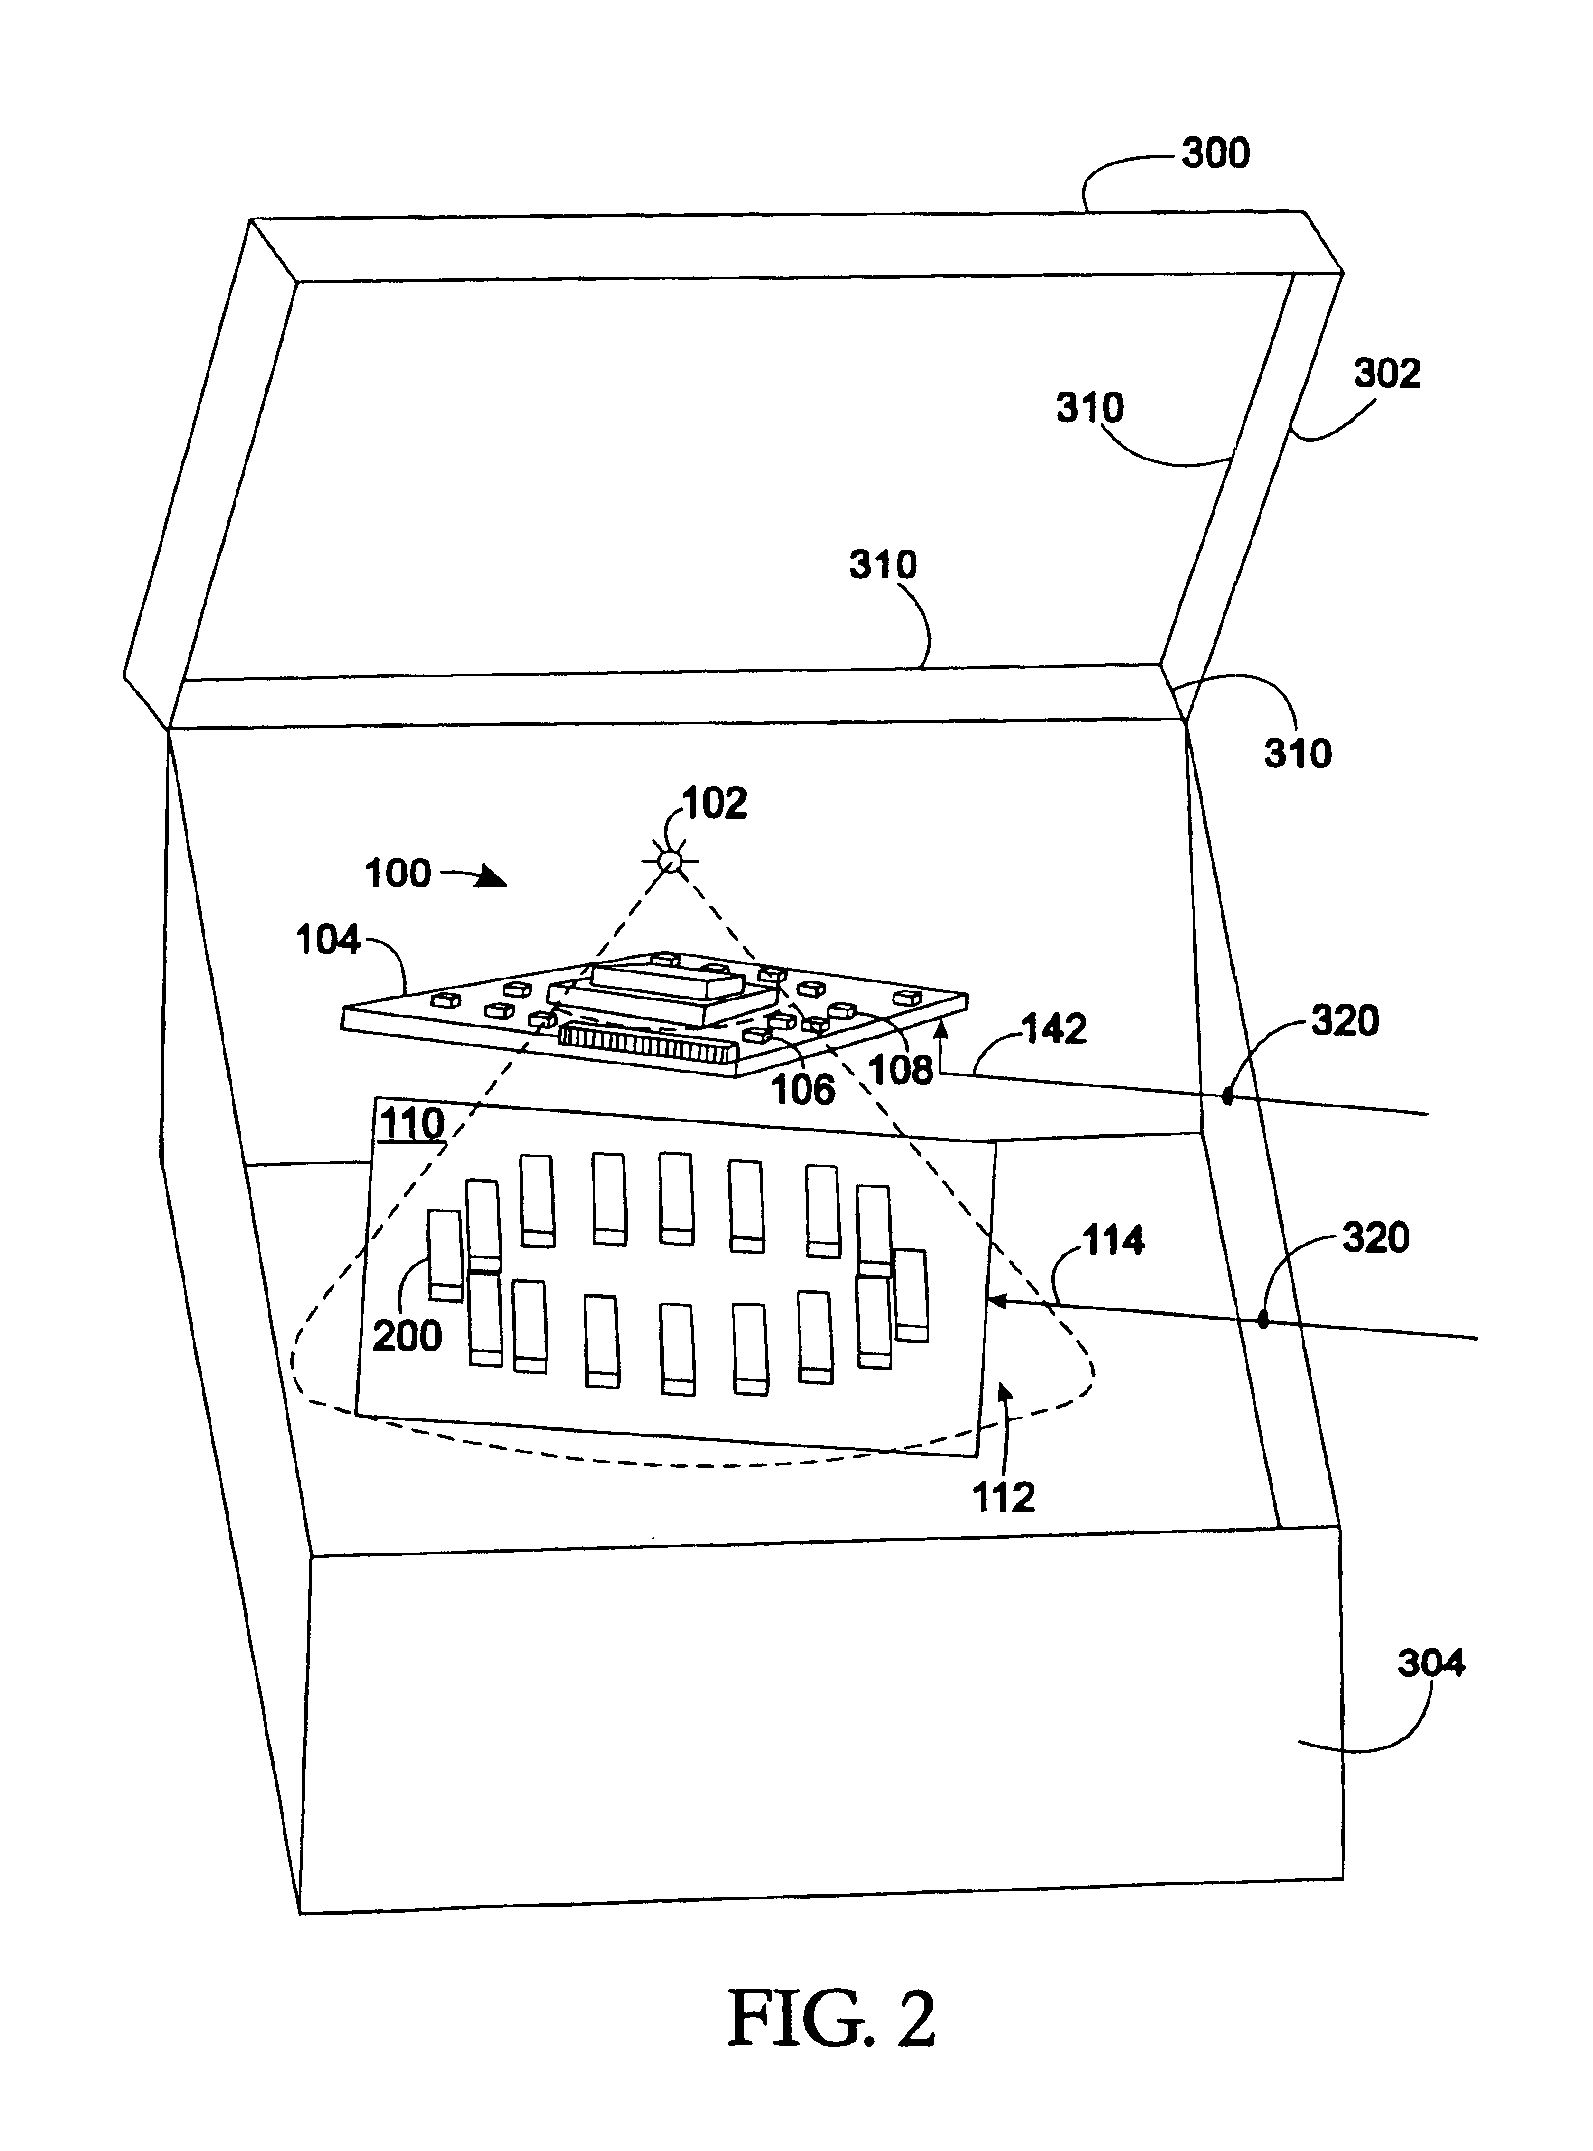 Iron ore composite material and method for manufacturing radiation shielding enclosure